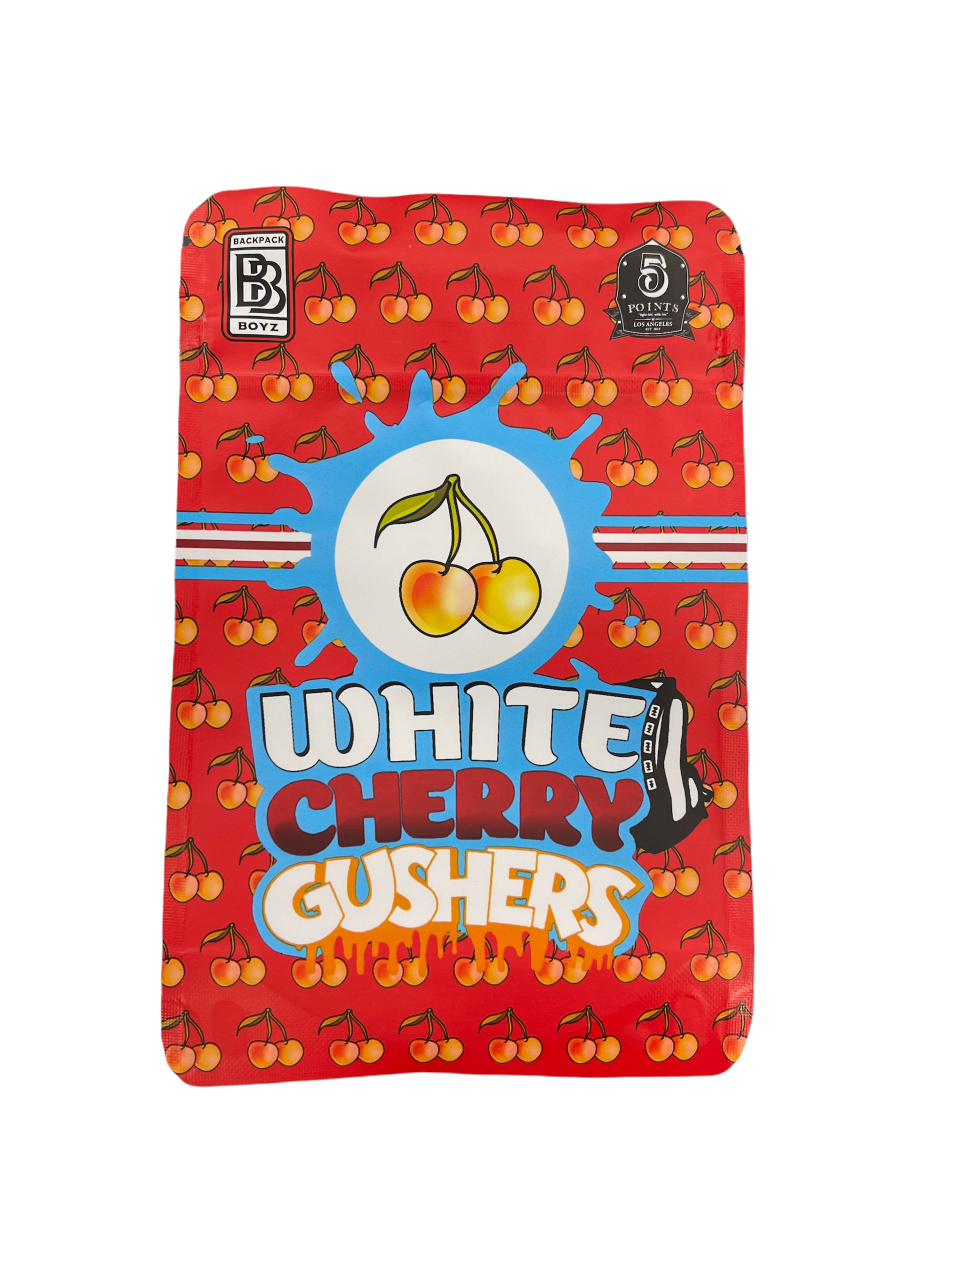 Backpack Boyz White Cherry Gushers Mylar Bag- 3.5g Tamper stickers-Packaging Only